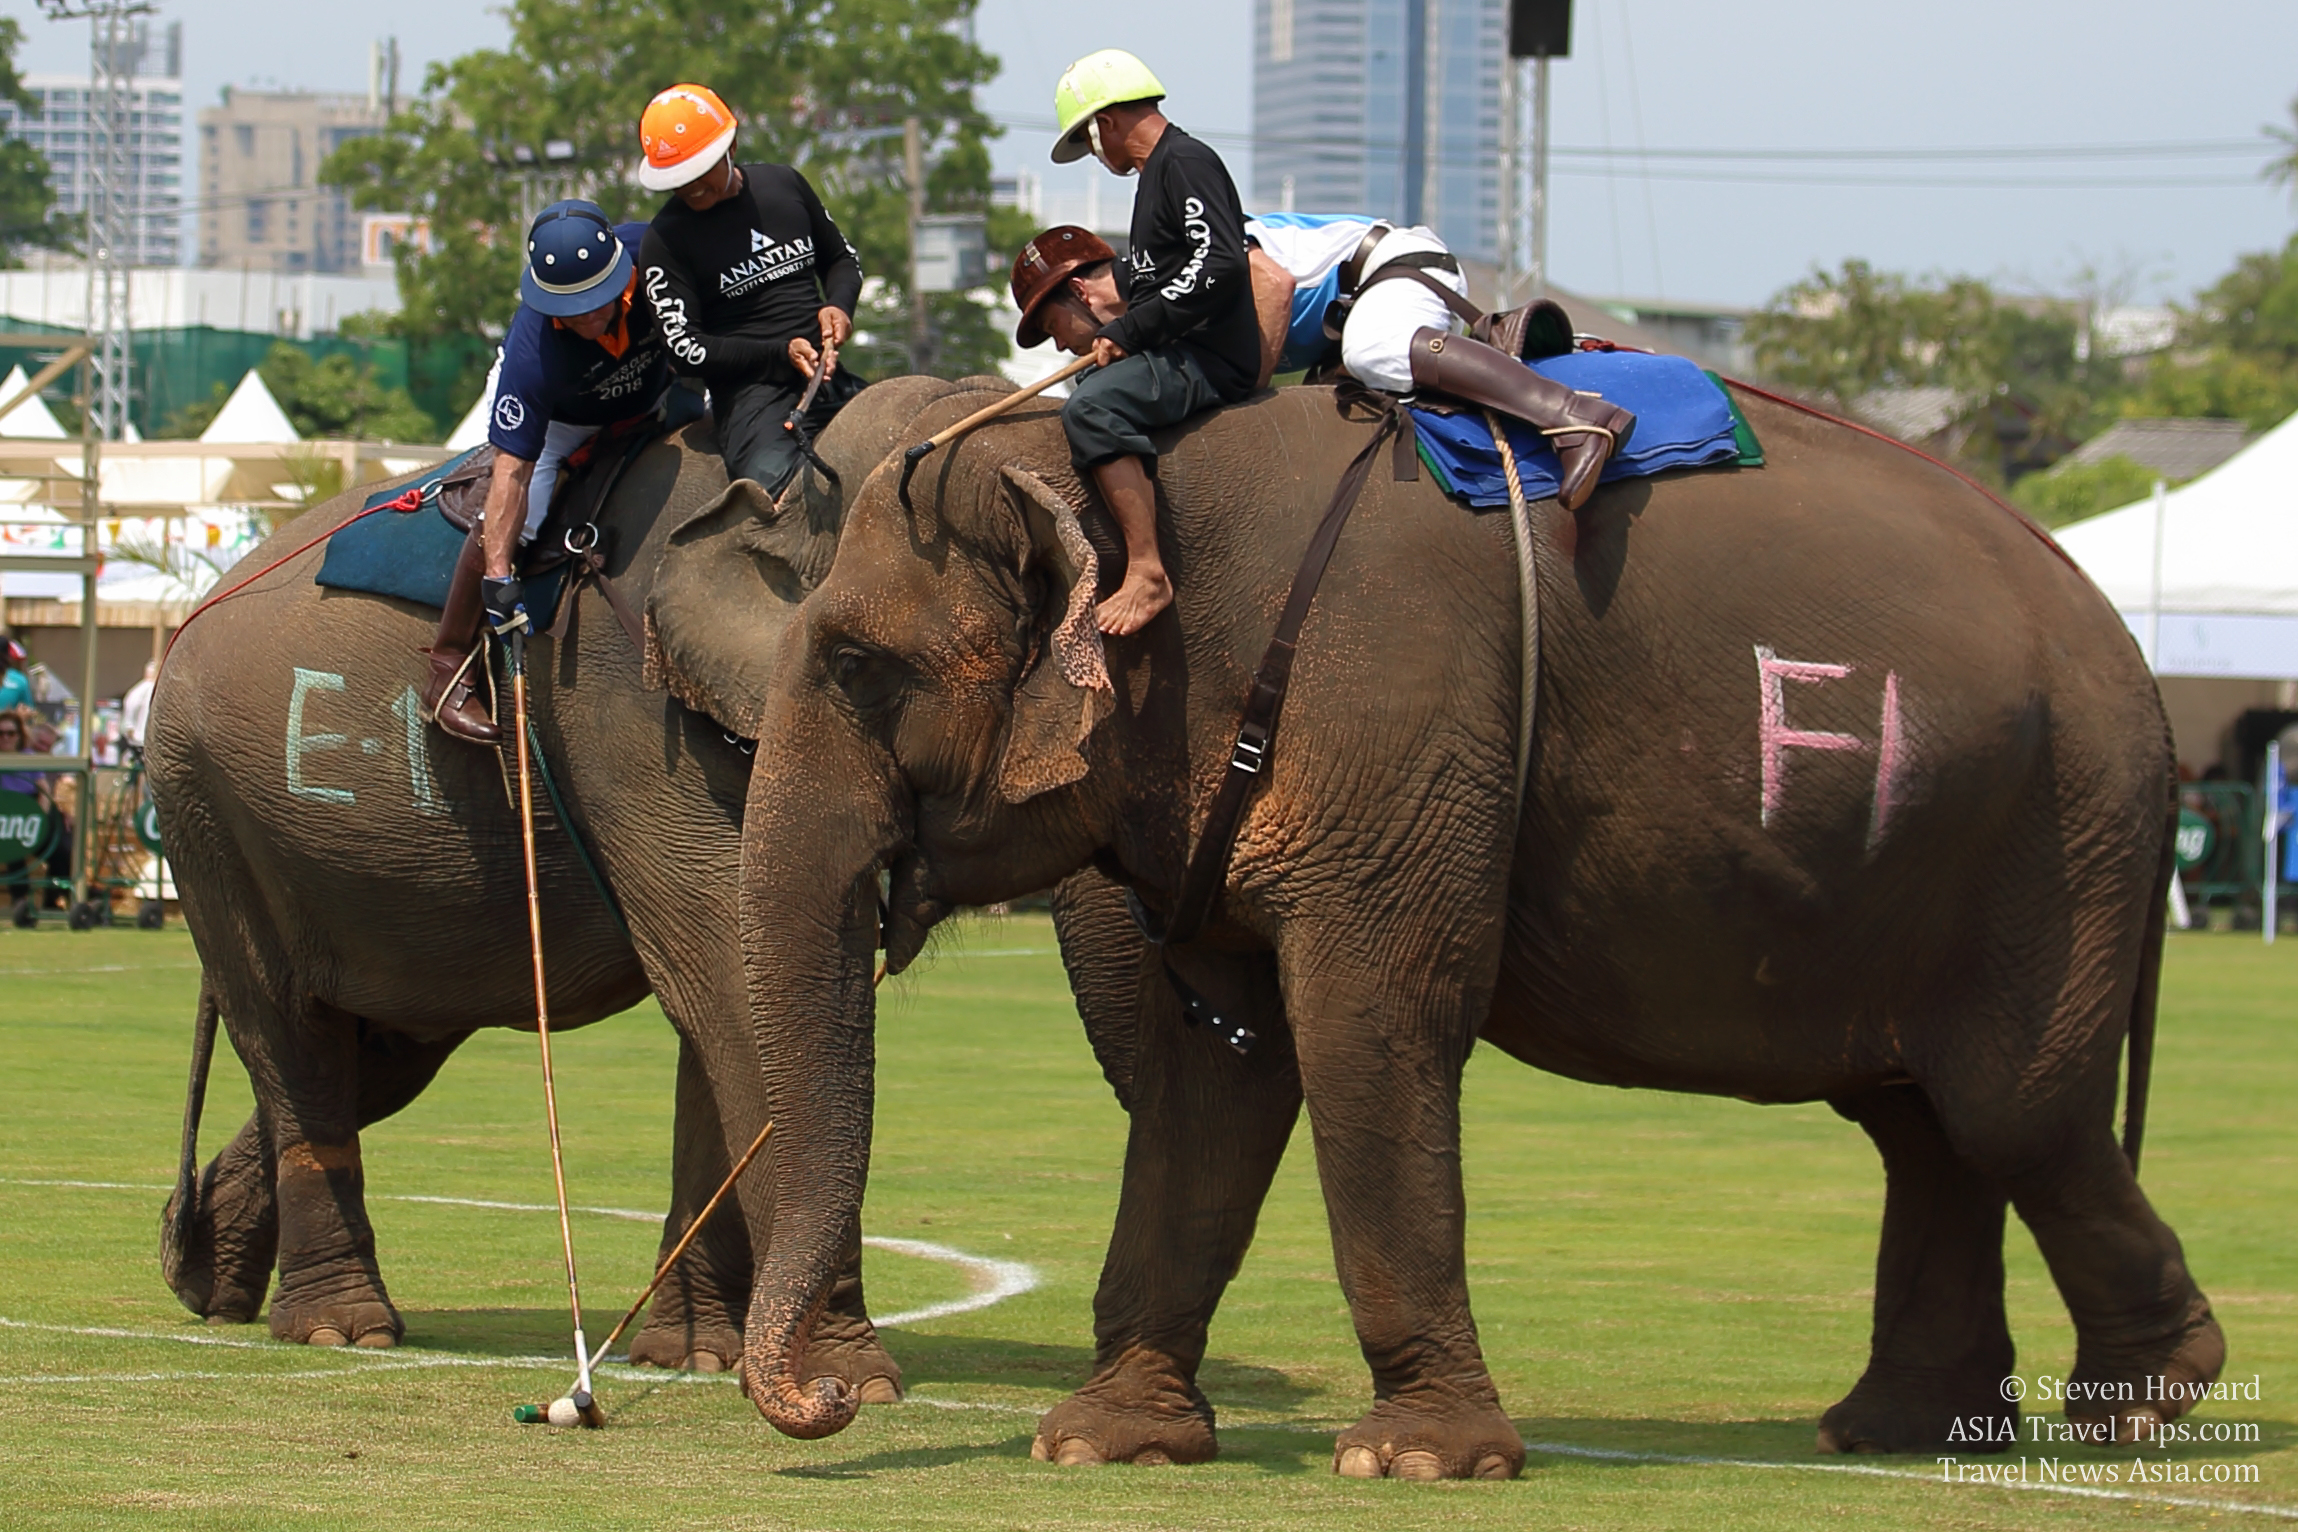 Pictures from 2018 King's Cup Elephant Polo in Bangkok, Thailand.